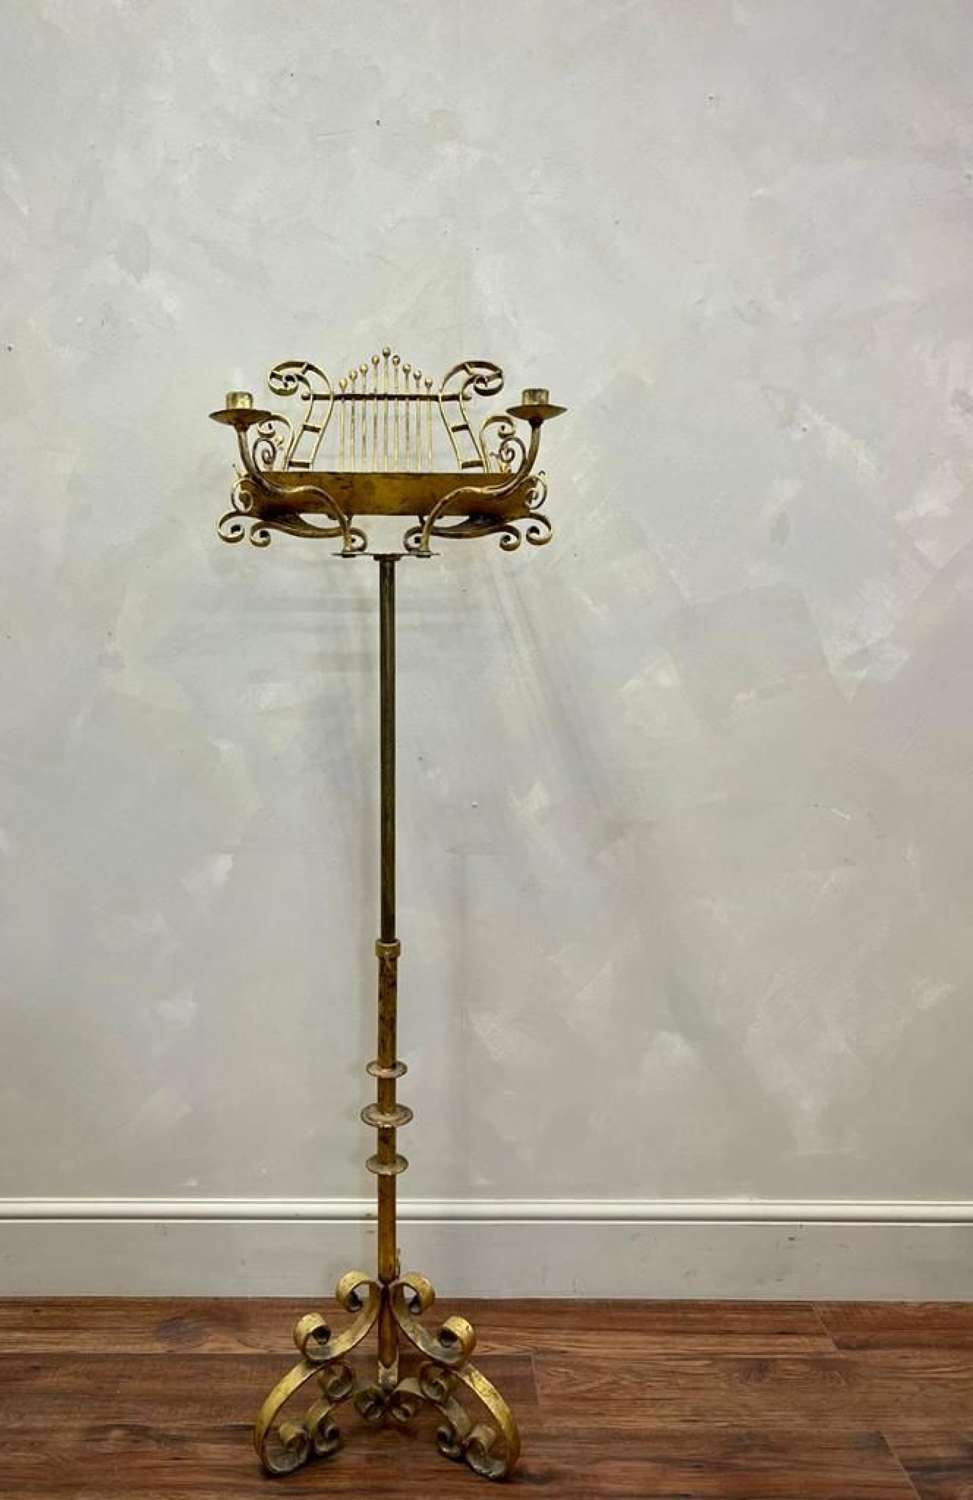 Early 20thC Spanish Gilt Iron Music Stand with Candelabra Sconces